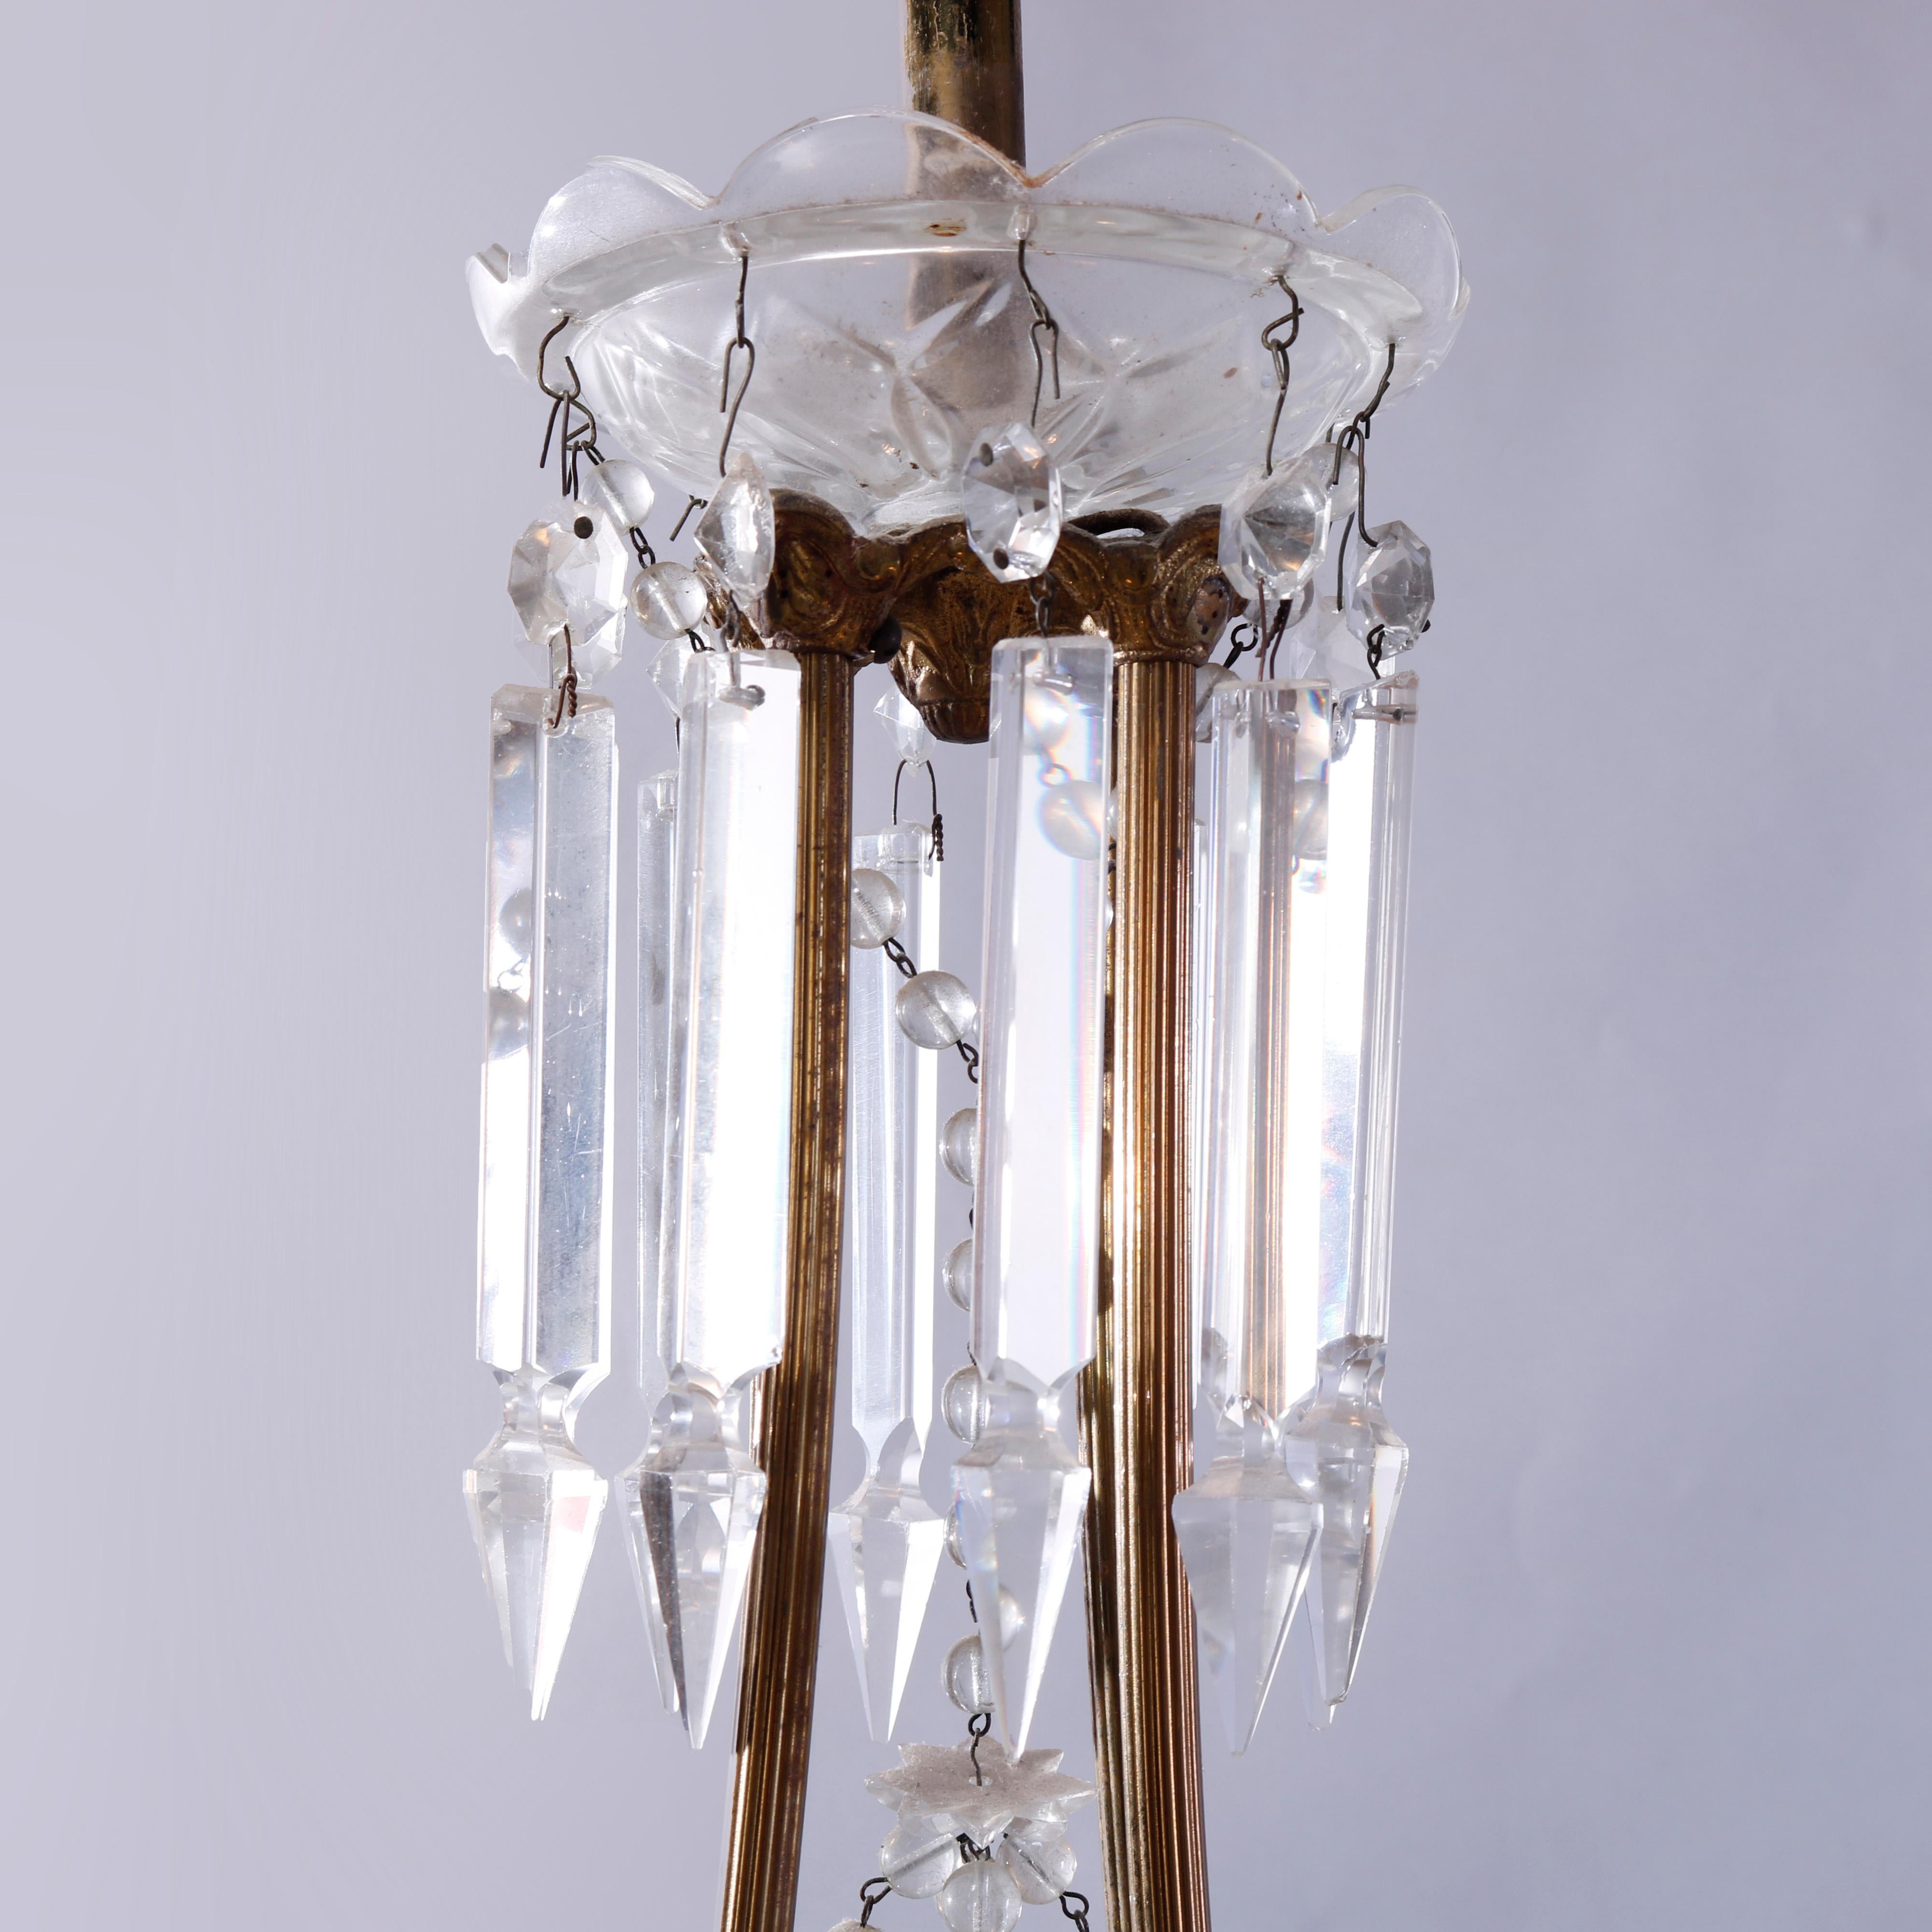 Antique French Style Bronzed Four-Light Chandelier with Draped Crystals, c1920 For Sale 2